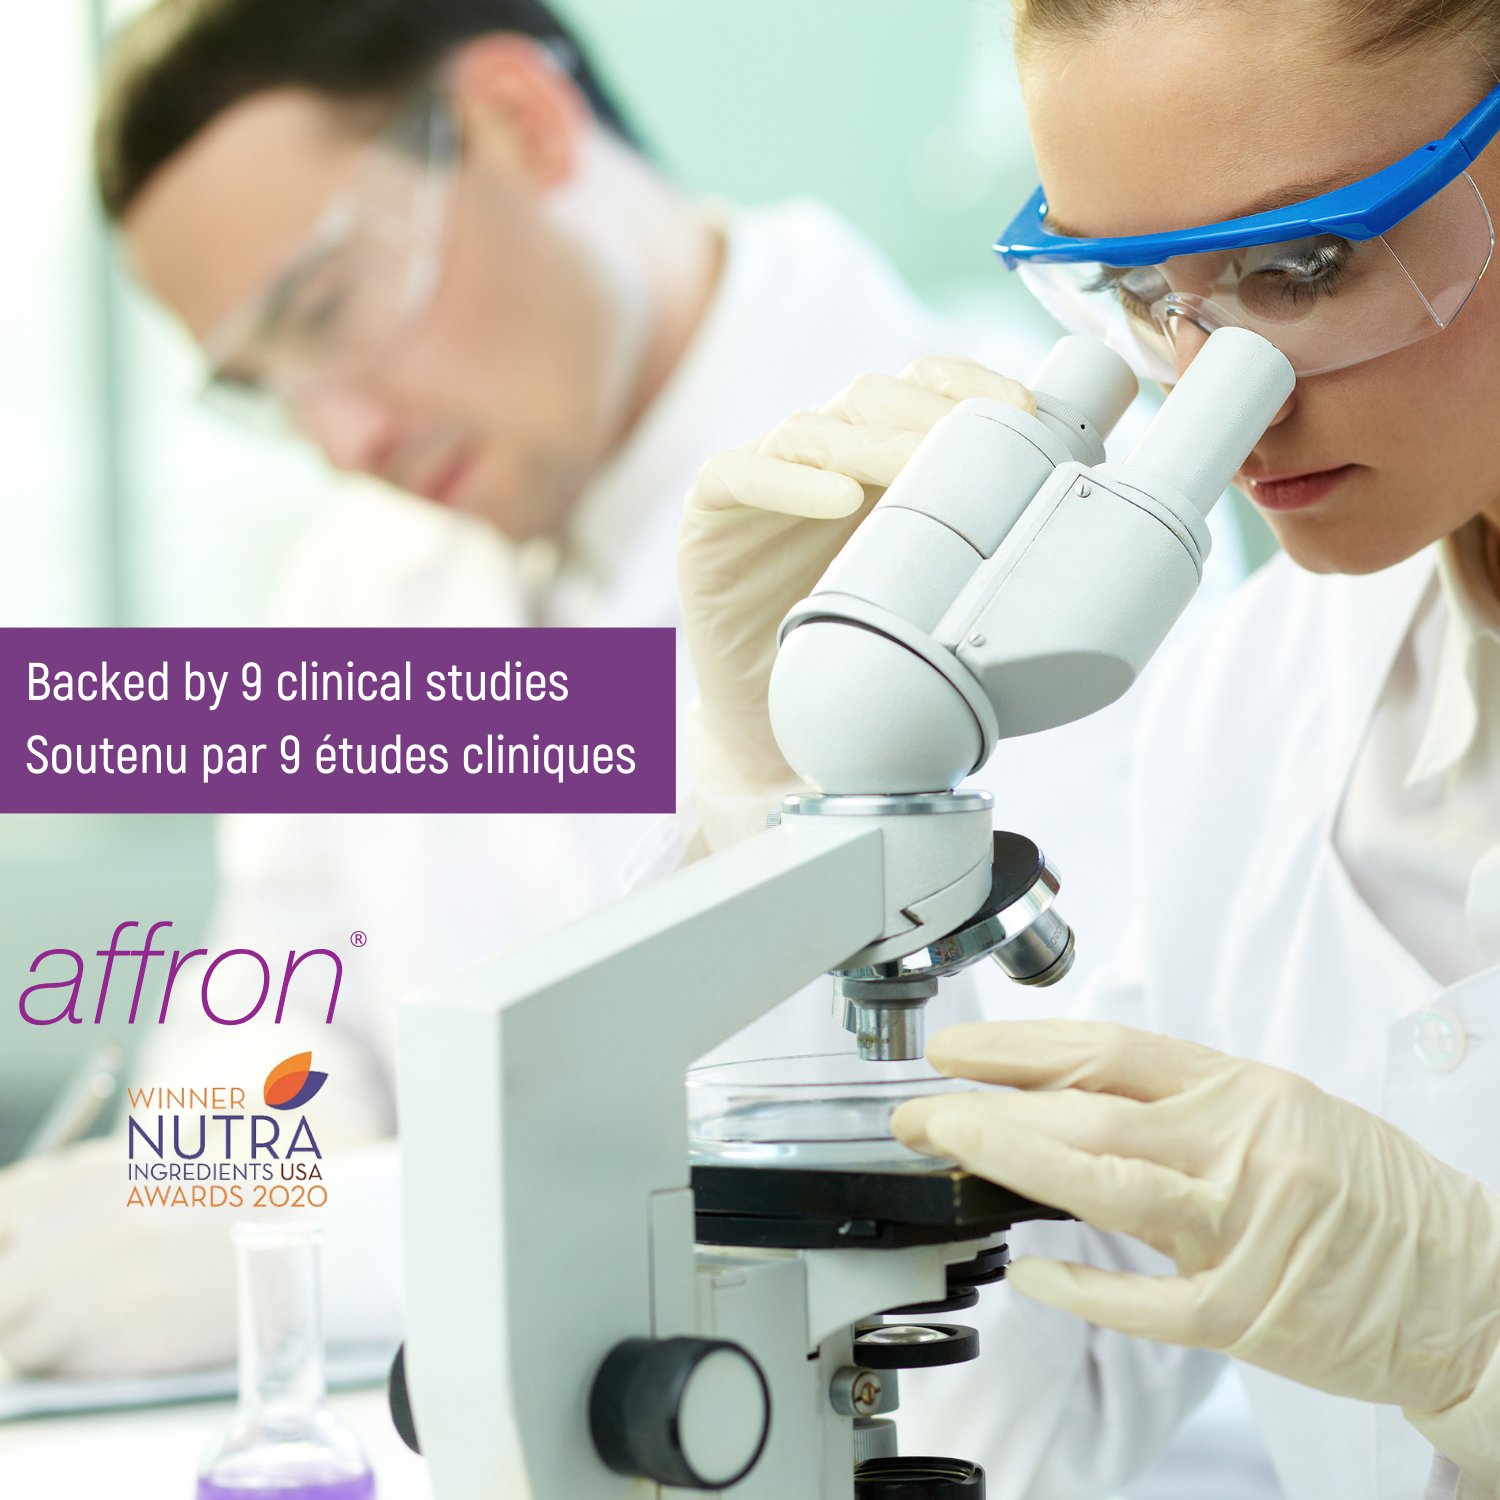 Saffron Extract Clinical Study